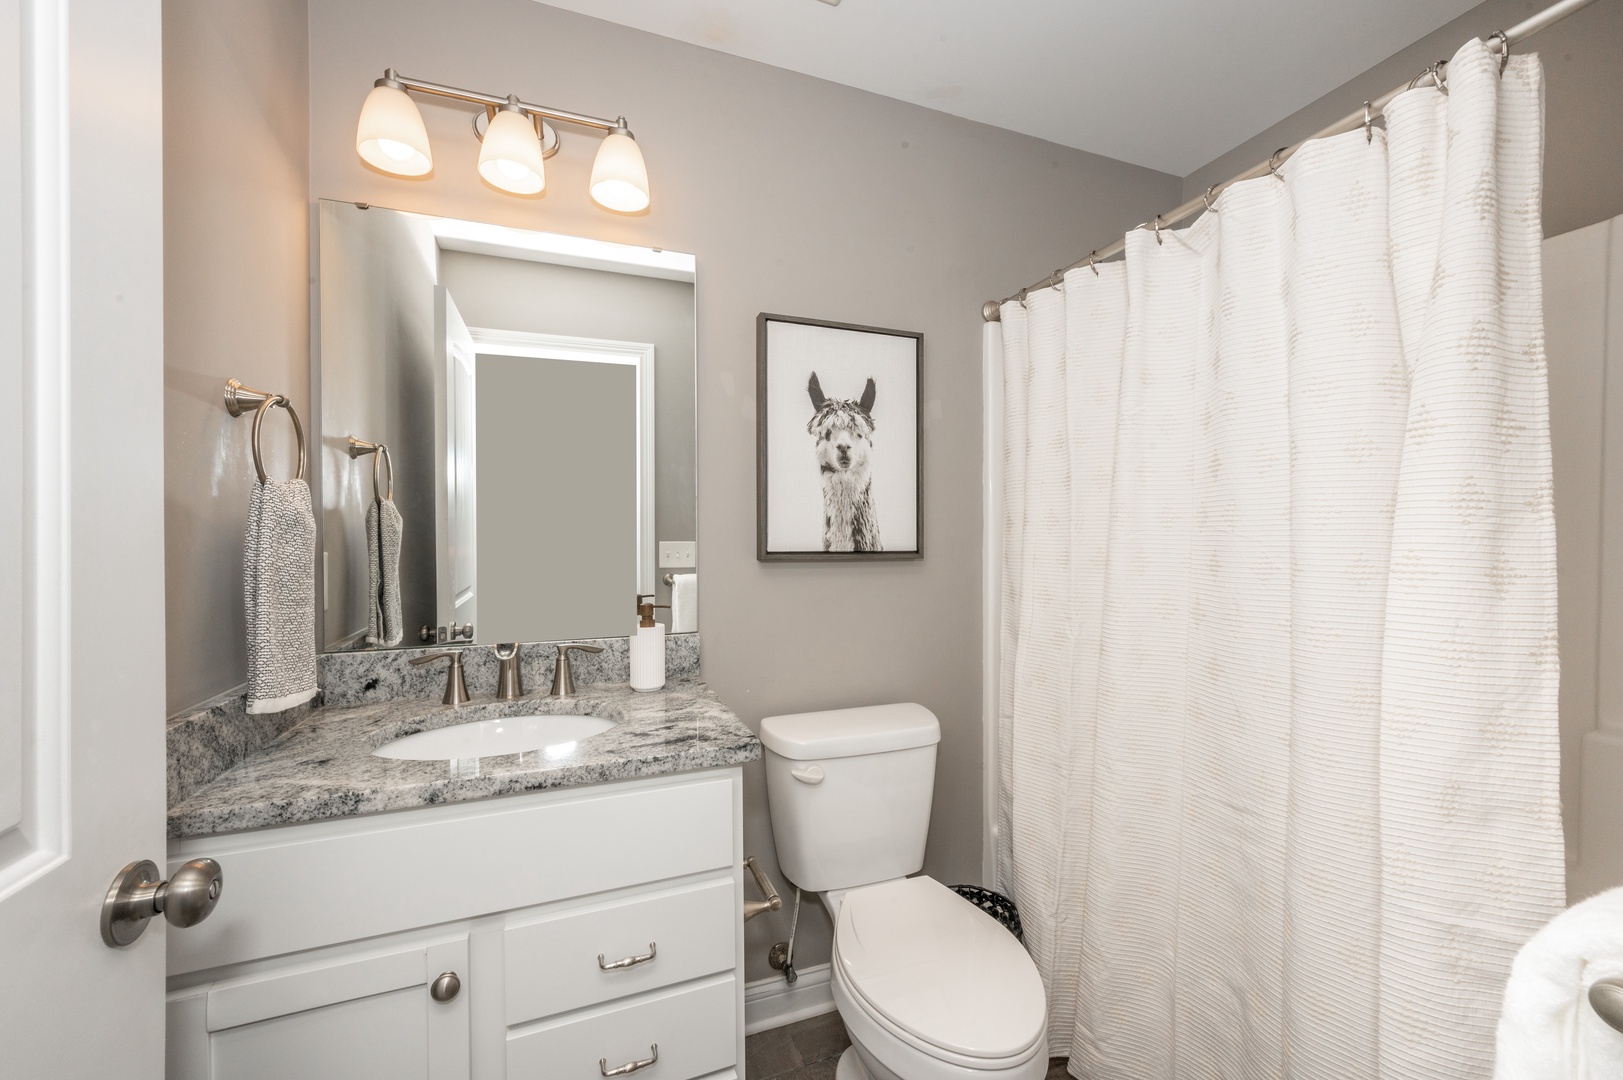 The main level full bathroom includes a single vanity & shower/tub combo